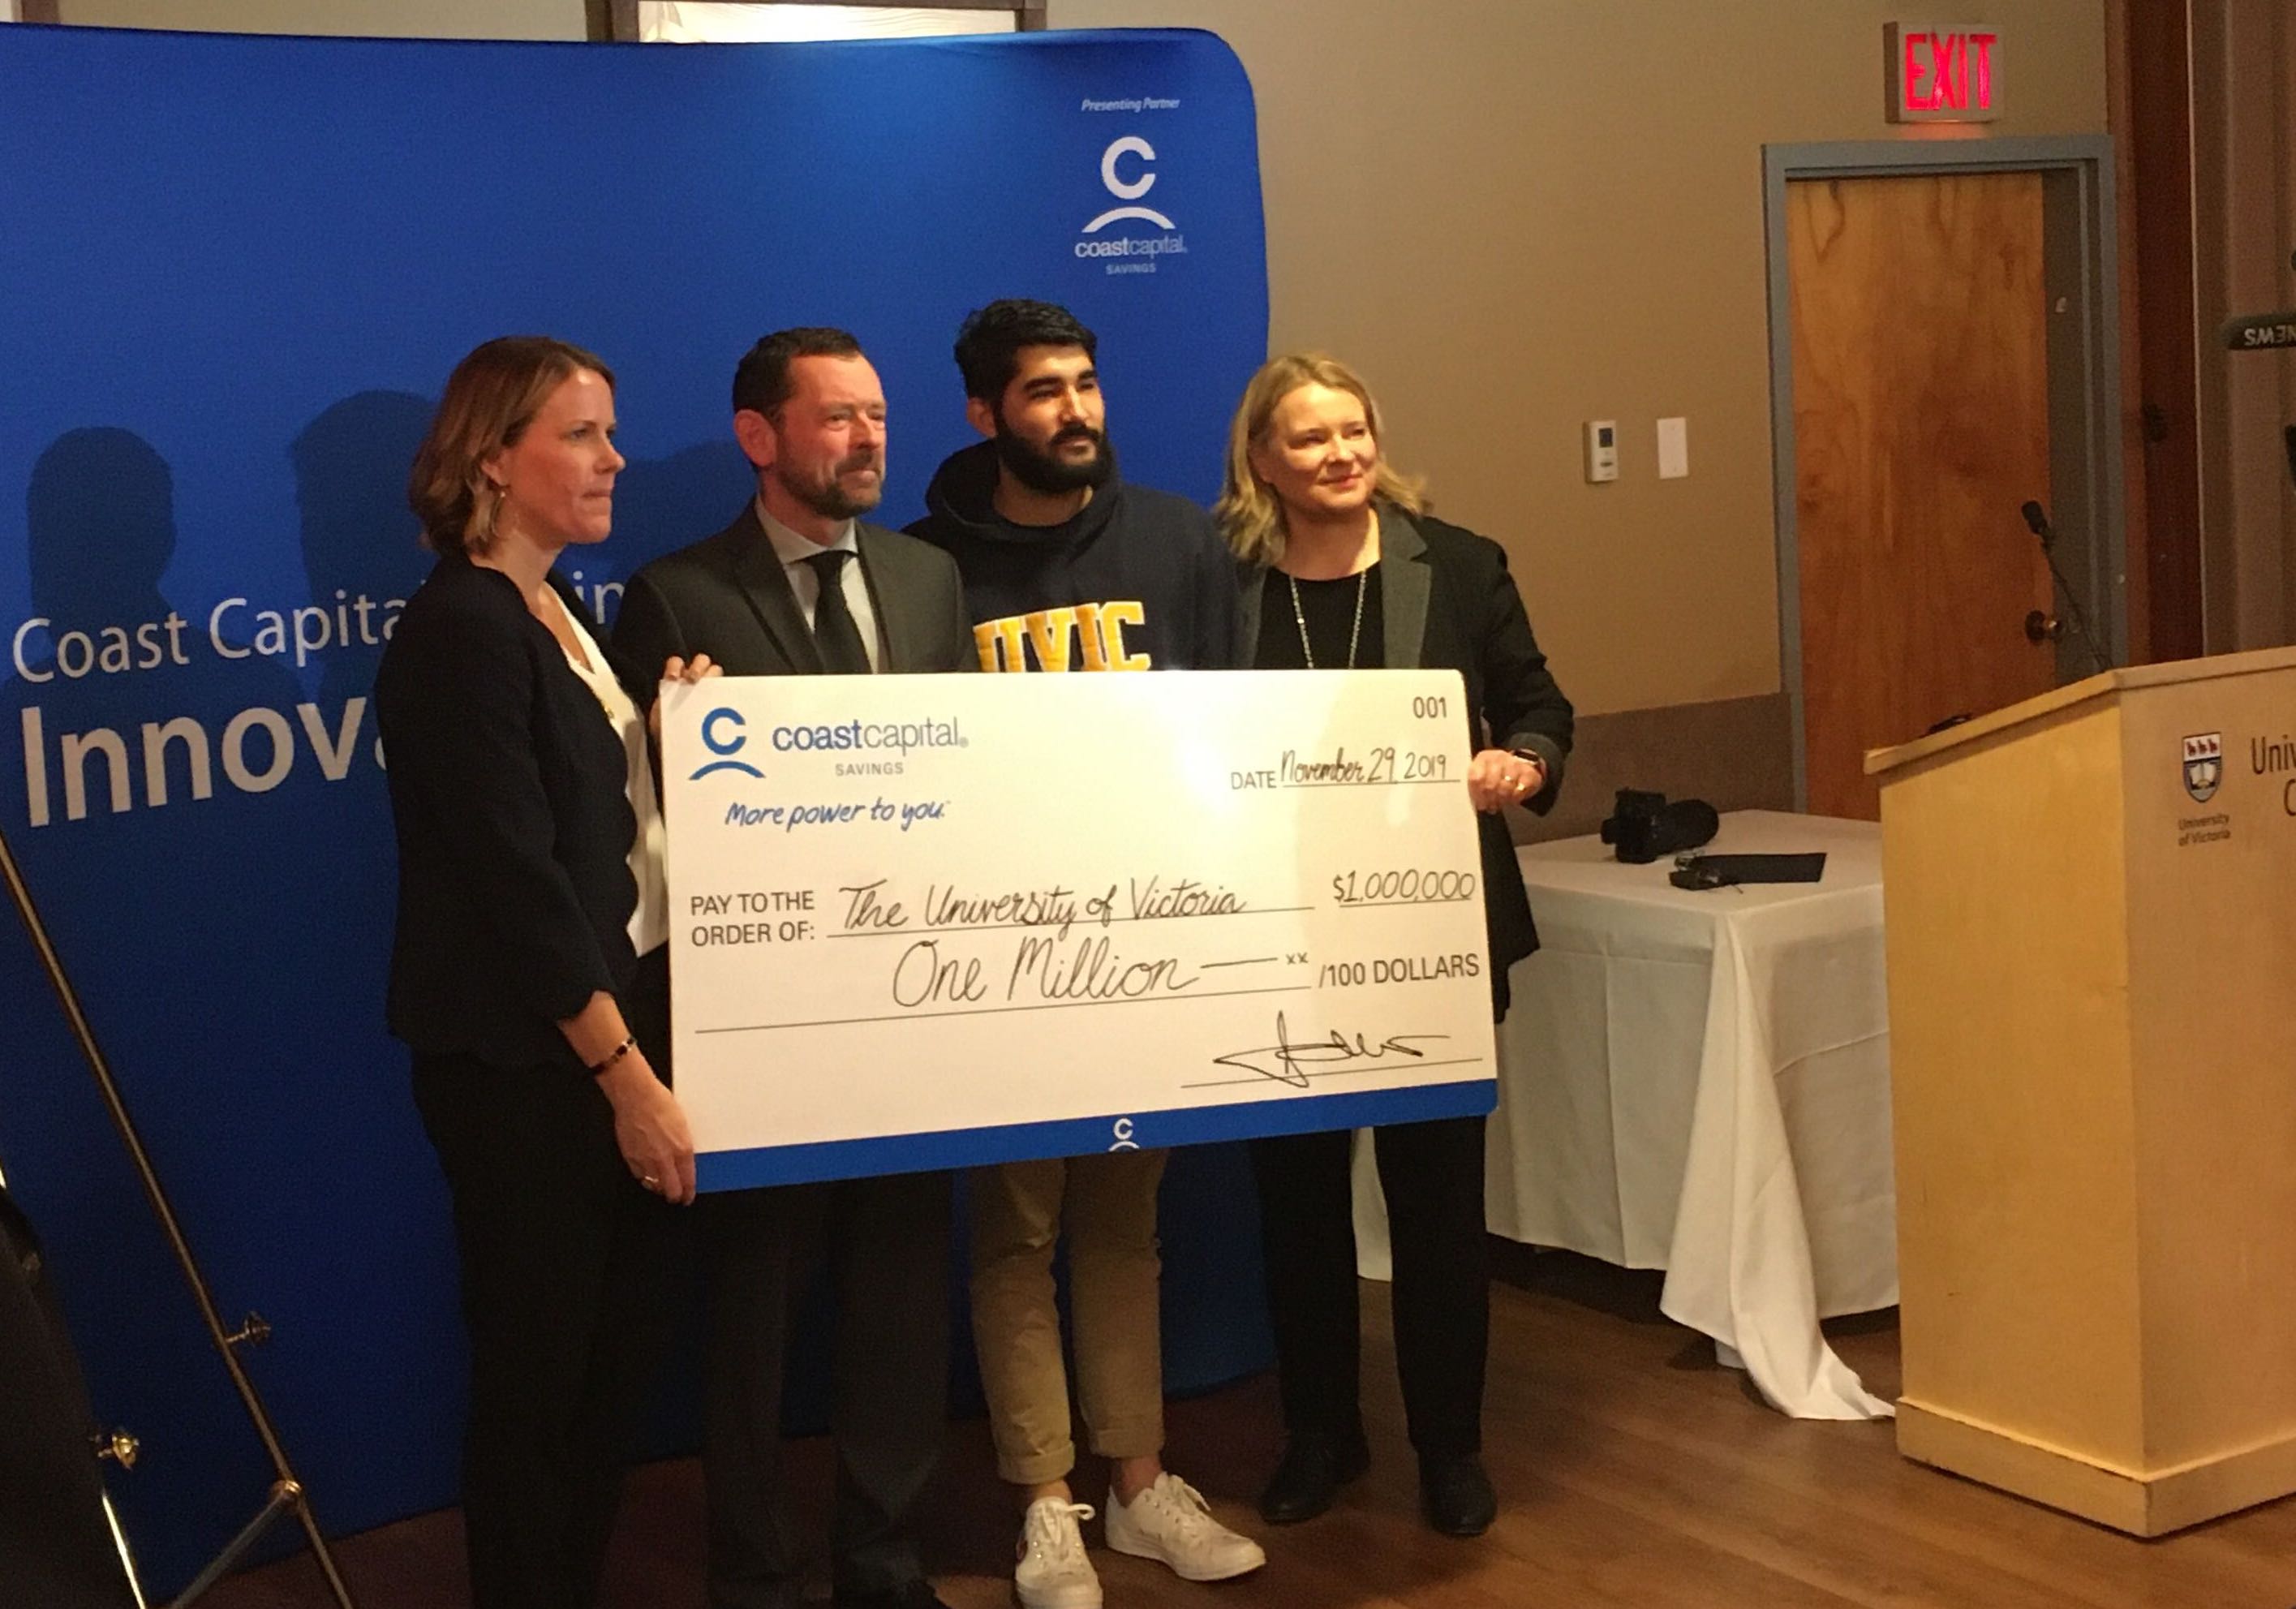 Coast Capital Savings announces one million dollar investment to UVic’s Innovation Centre